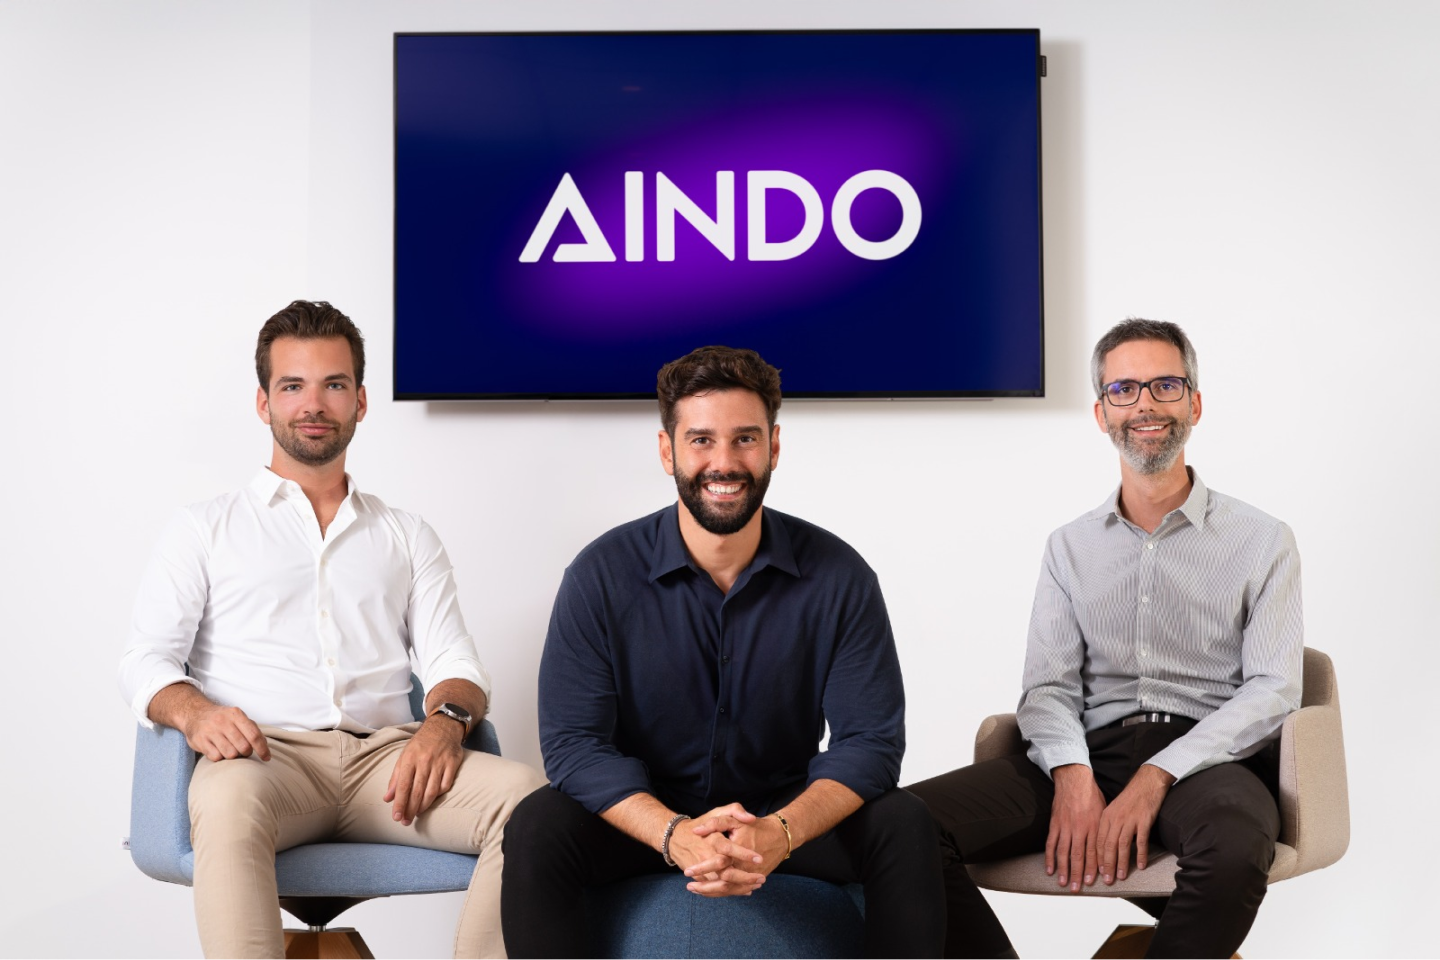 Aindo Secures Investment How, Why, What's Next?